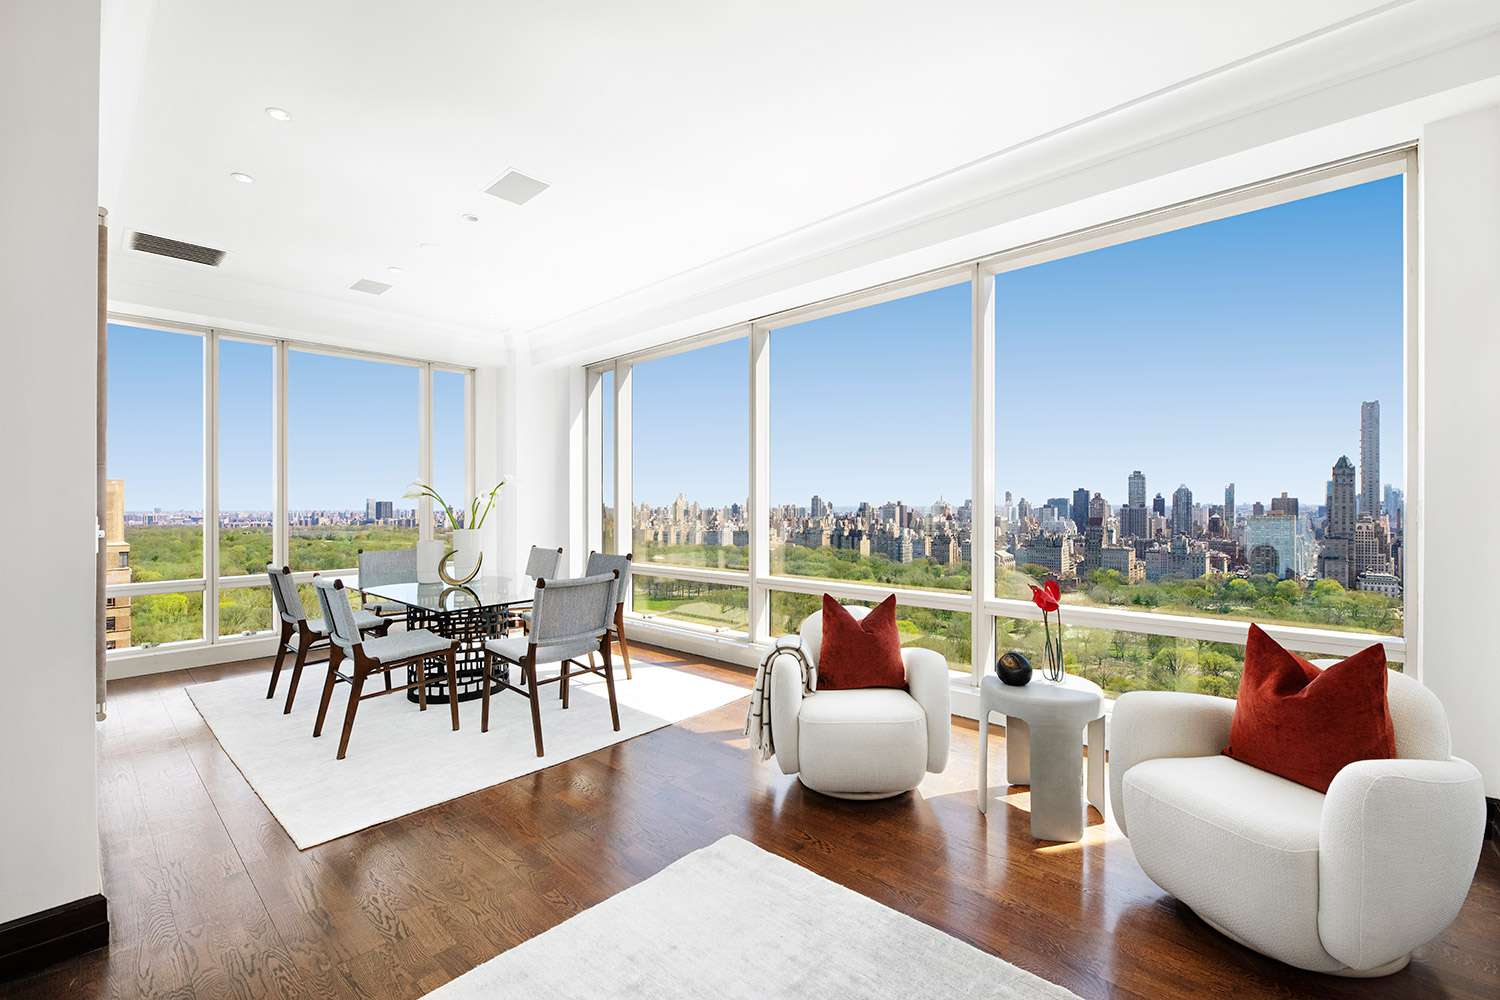 Janet Jackson Lists Her Decades-Long NYC Condominium for $8.9 Million